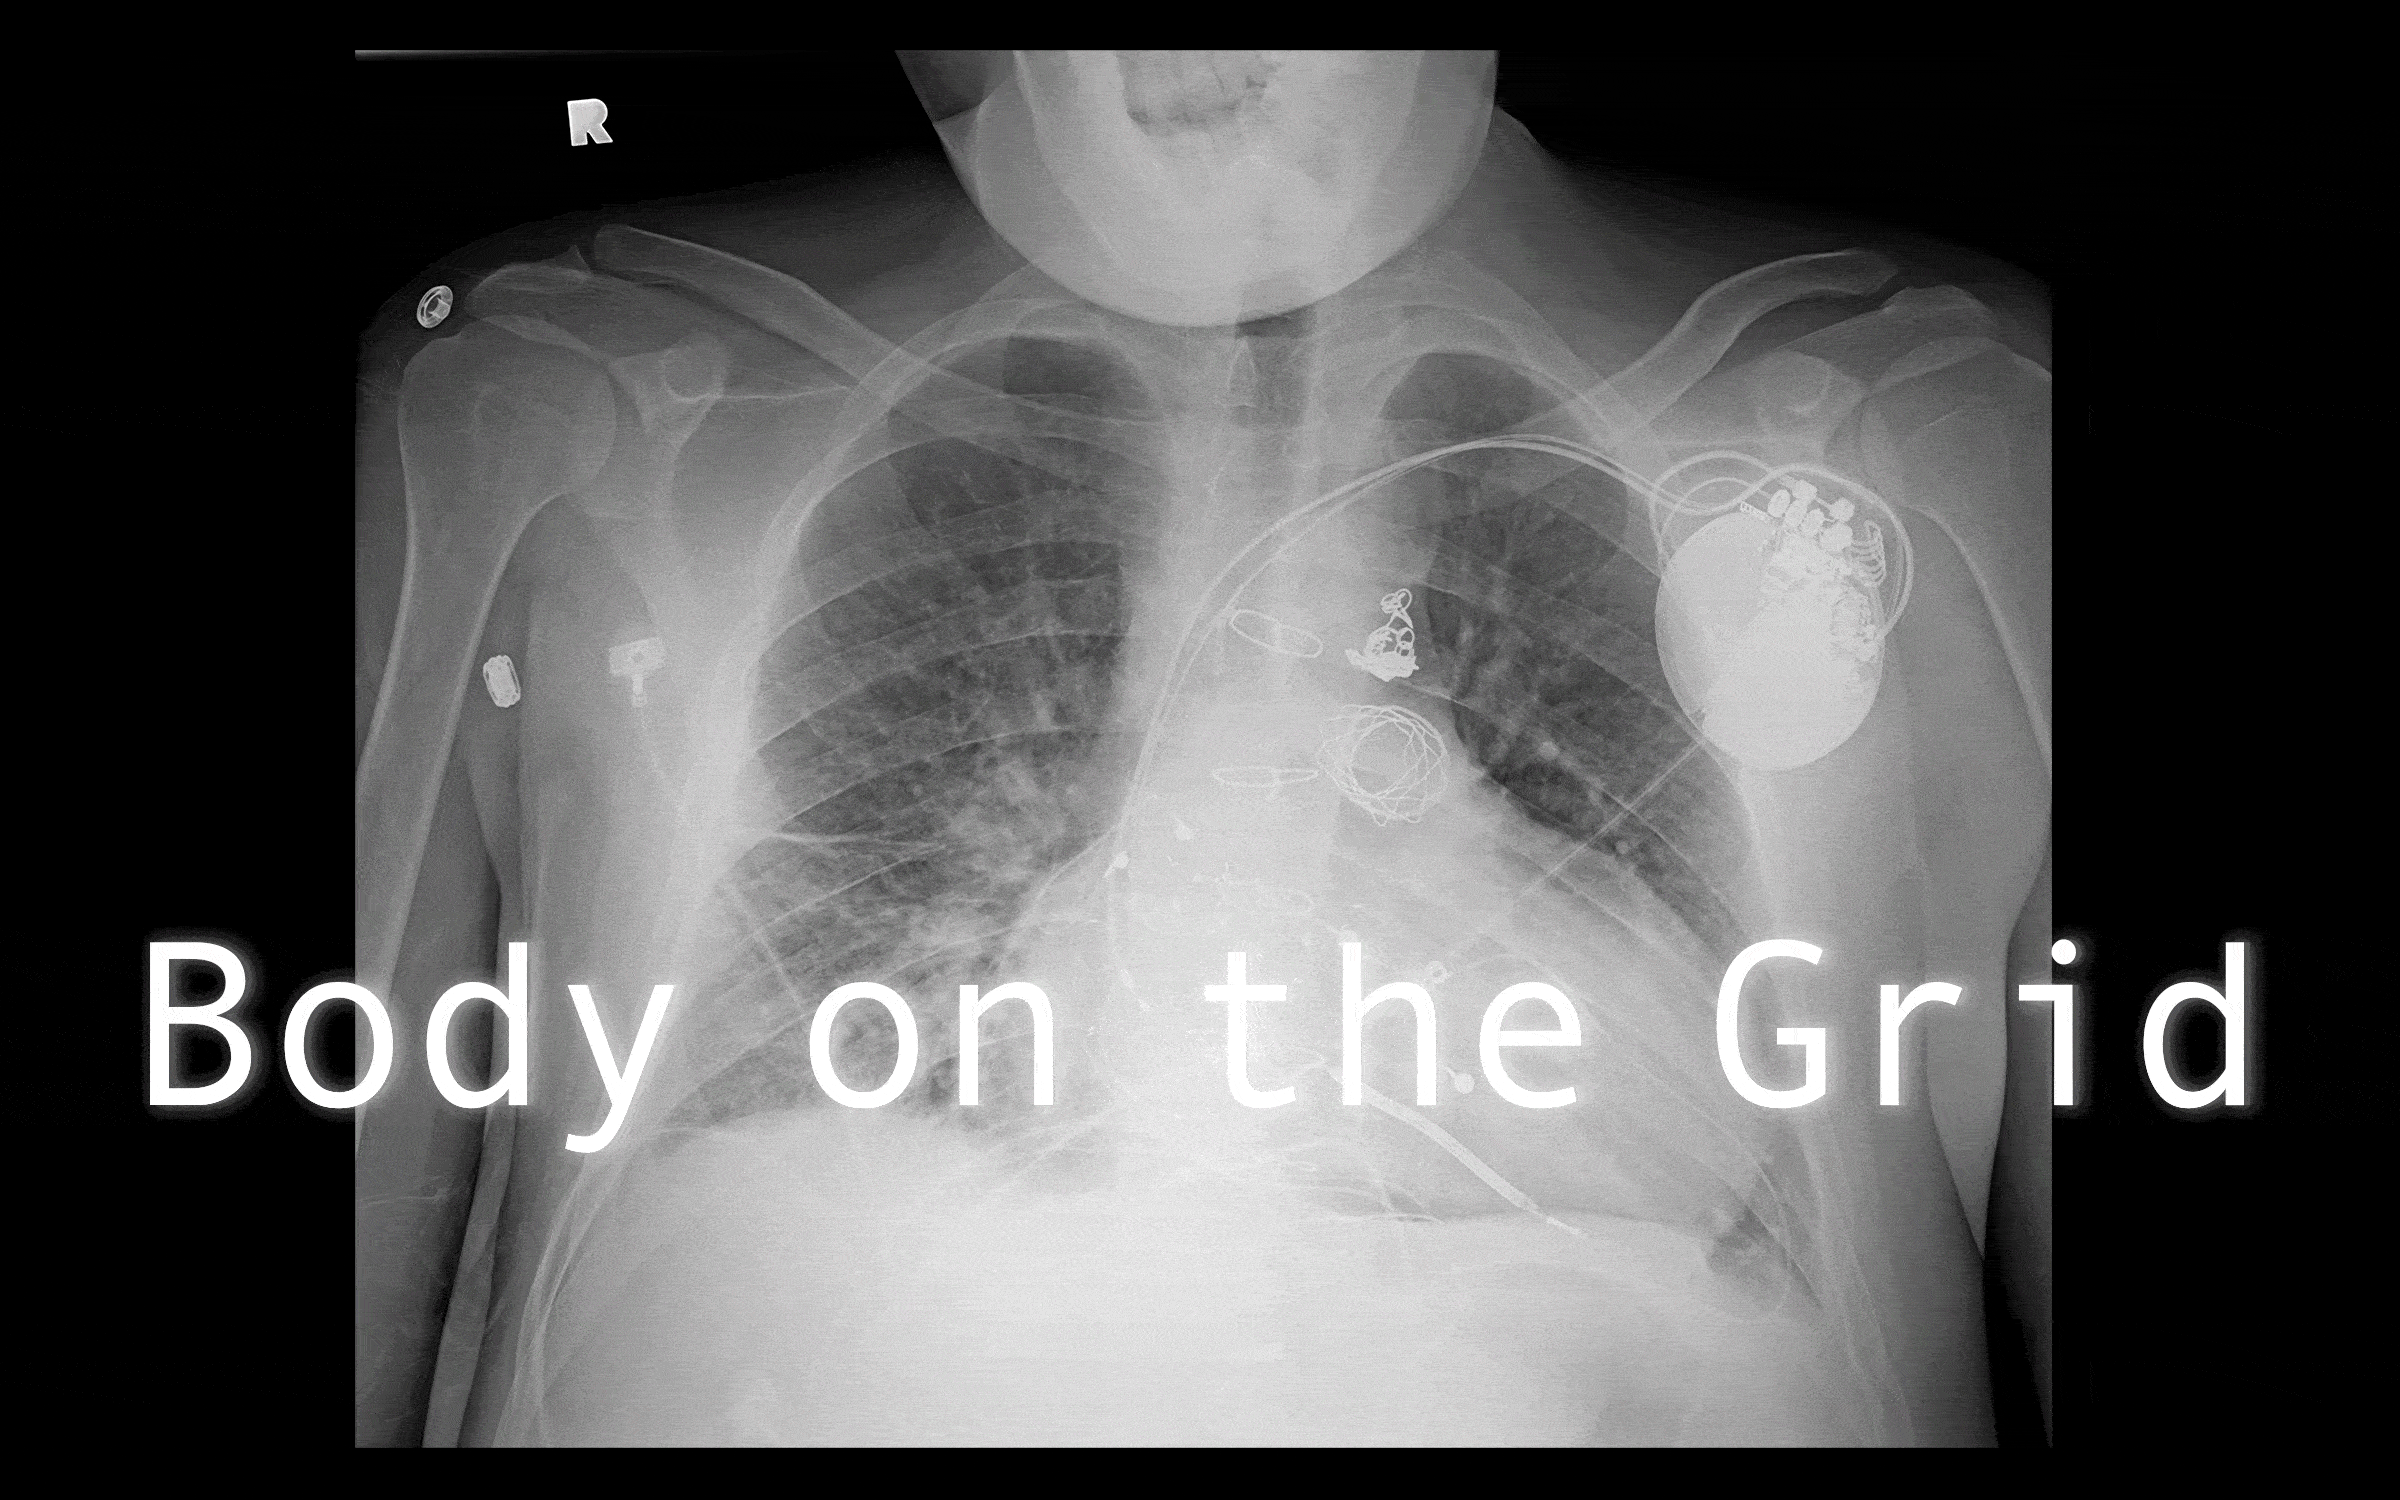 An x-ray of the author’s chest, with the text “Body on the Grid” juxtaposed over the image.